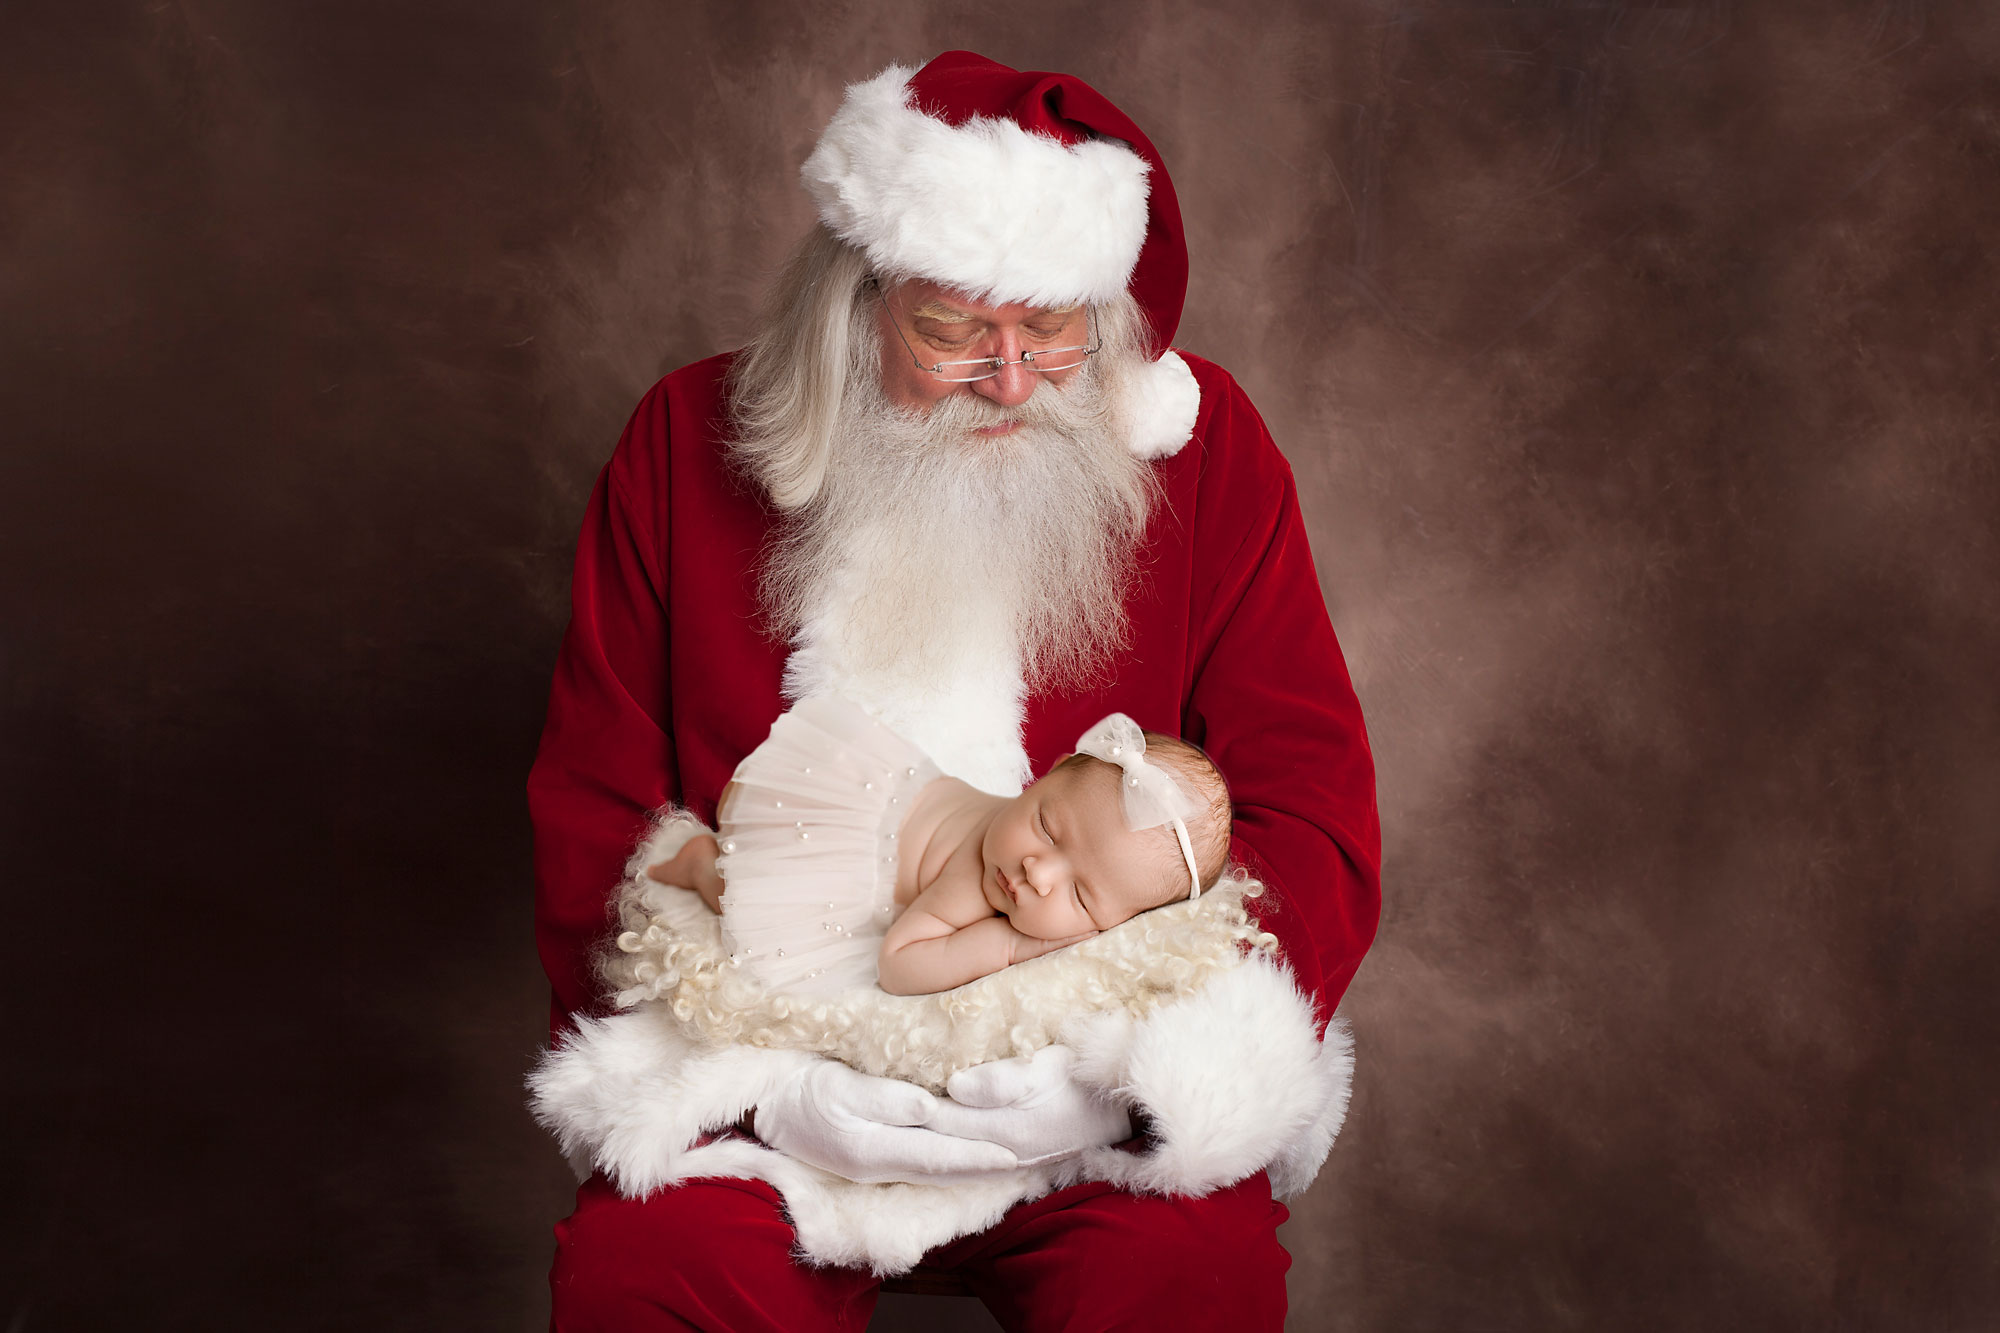 newborn baby girl in a basket help by santa clause